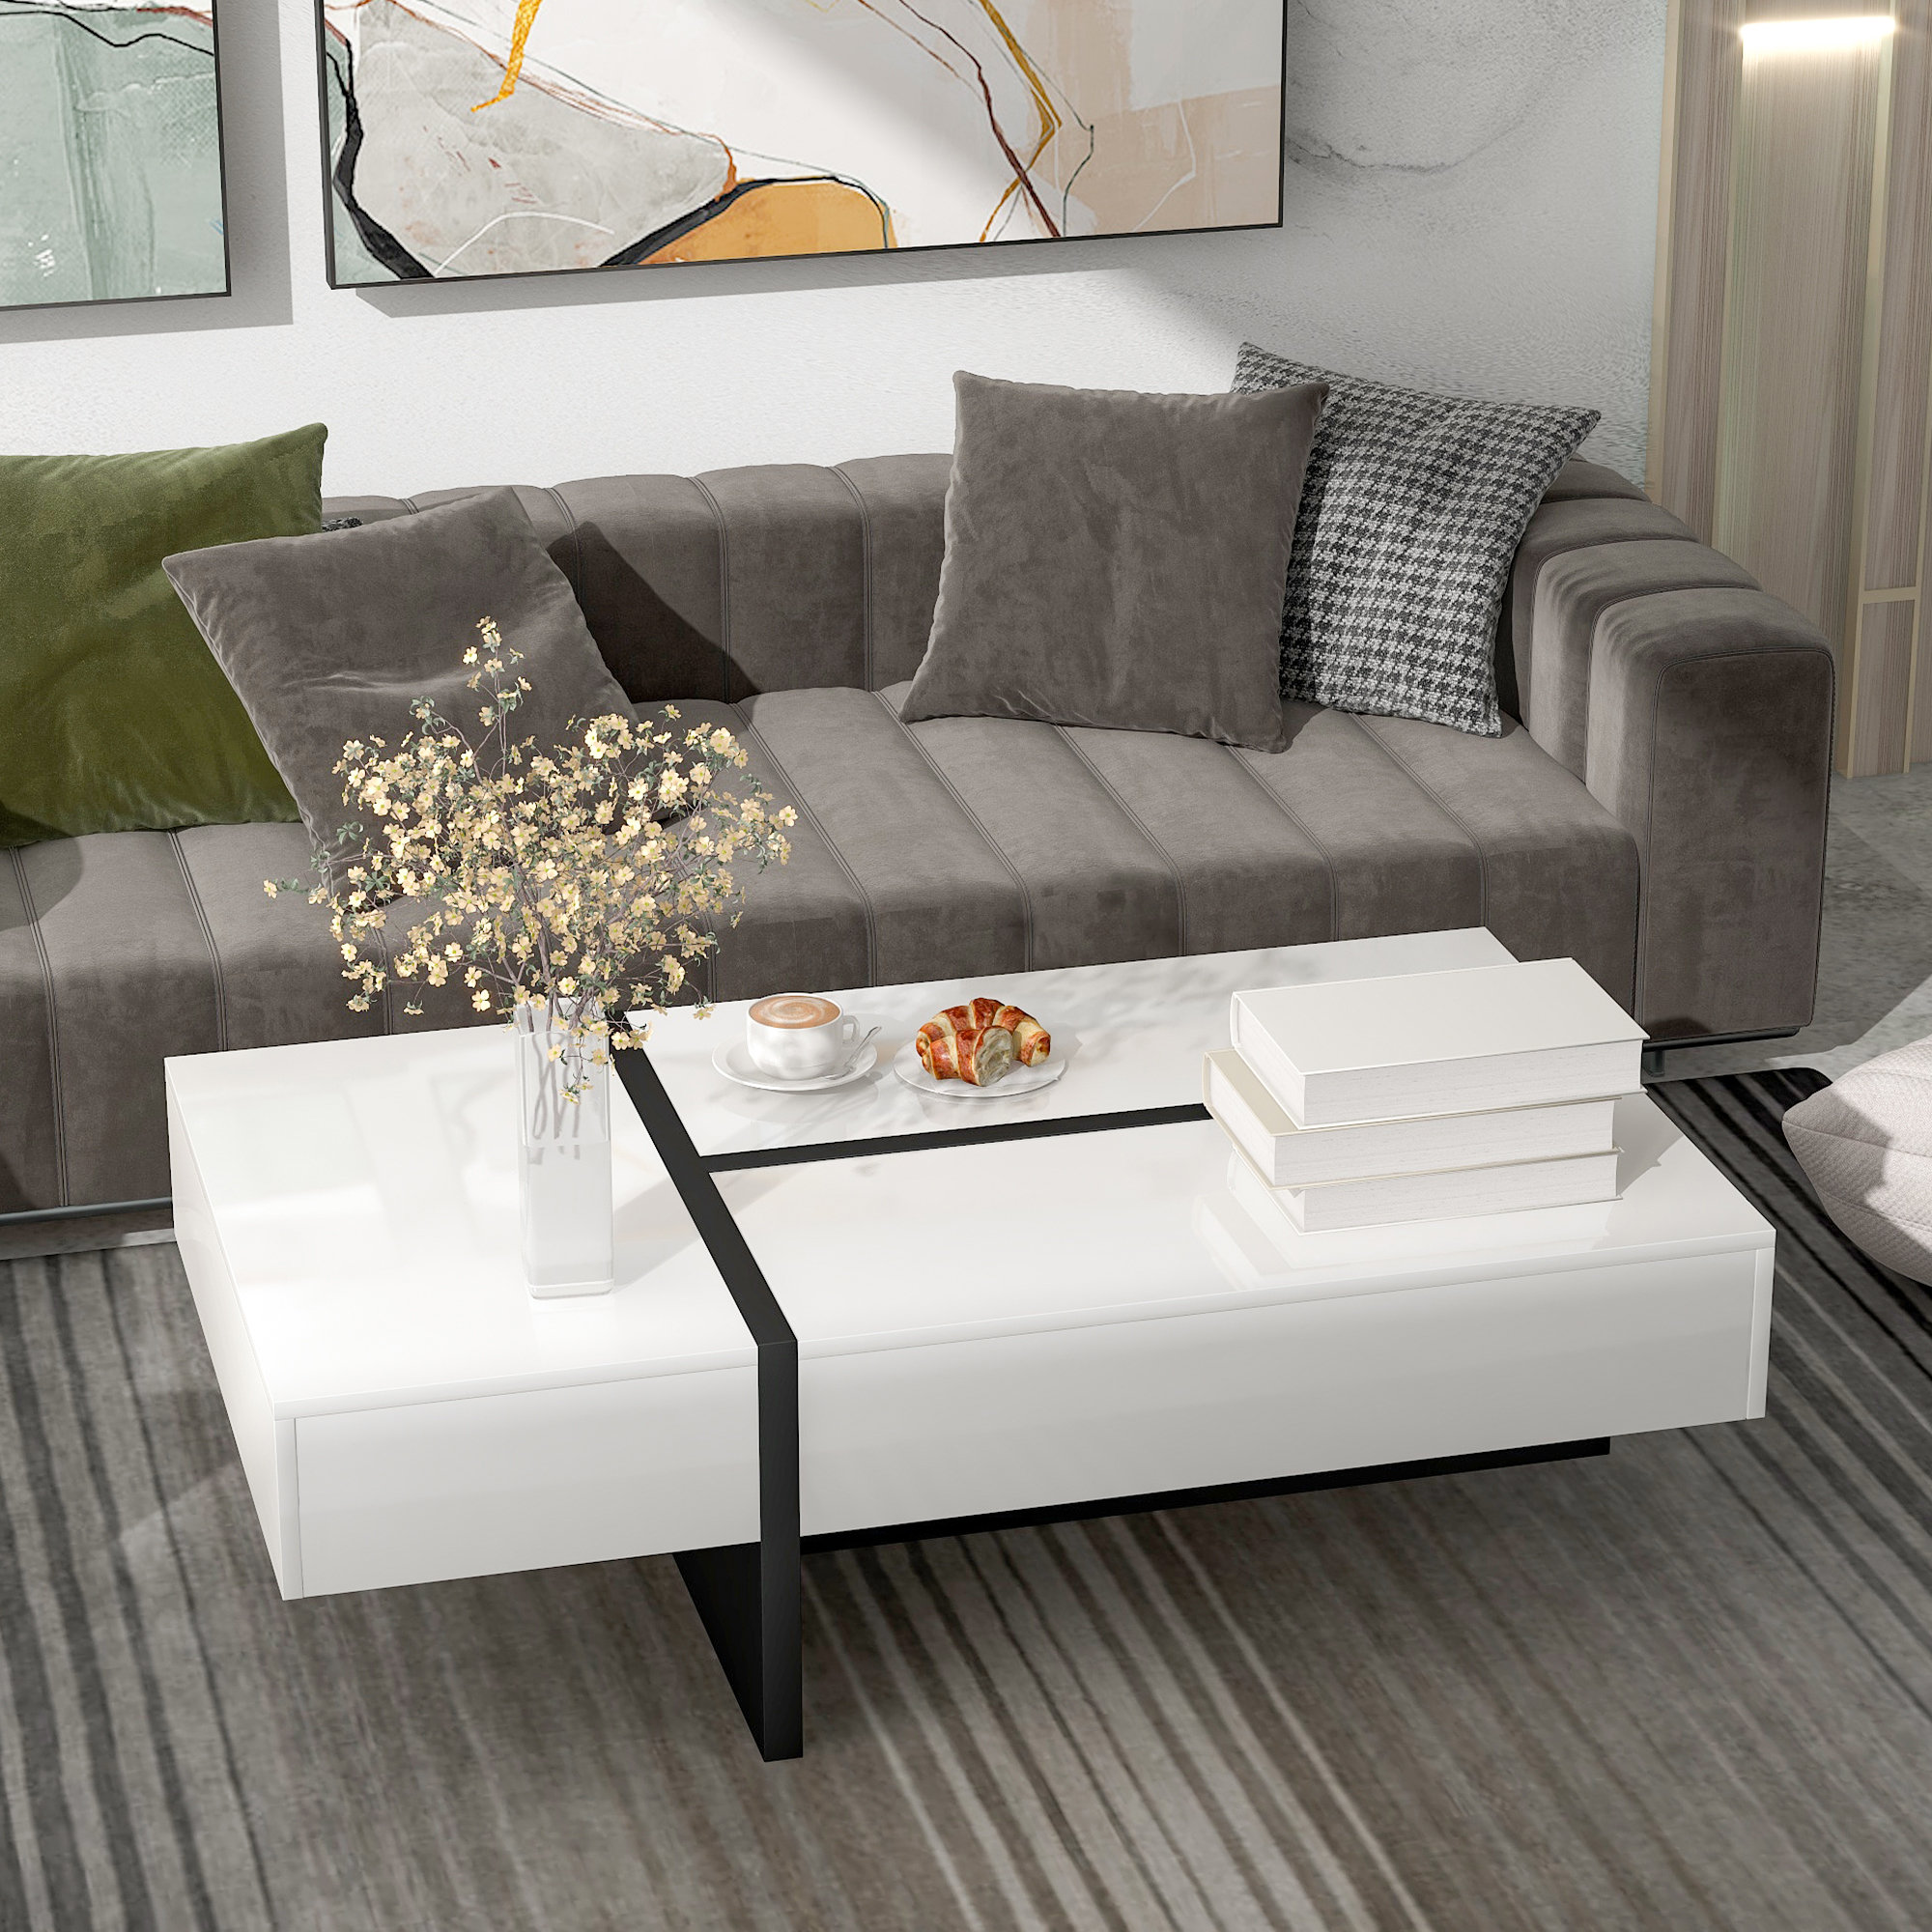 White Couch with All White Pillows - Transitional - Living Room